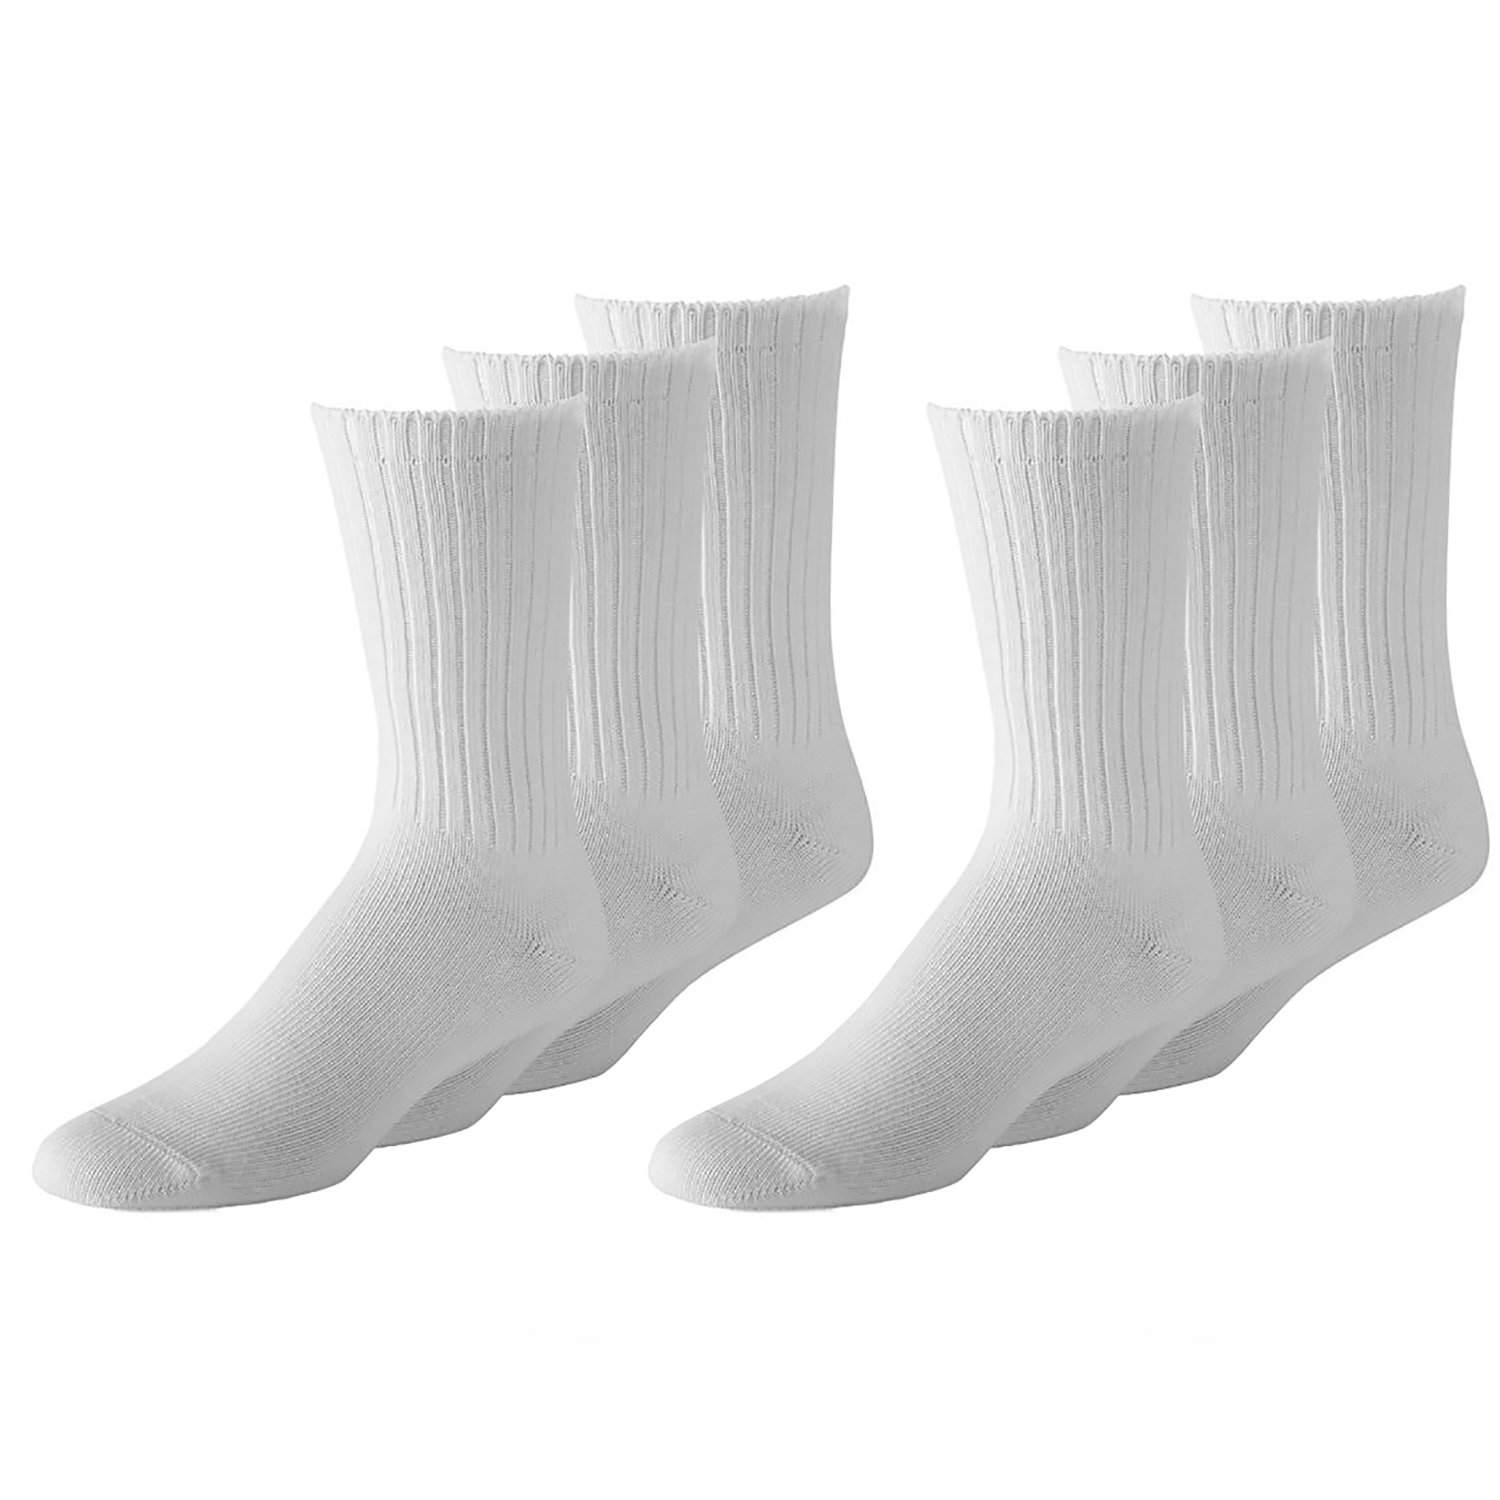 Pack of 144 Daydana Athletic Crew Socks -Wholesale Lot - All Sizes